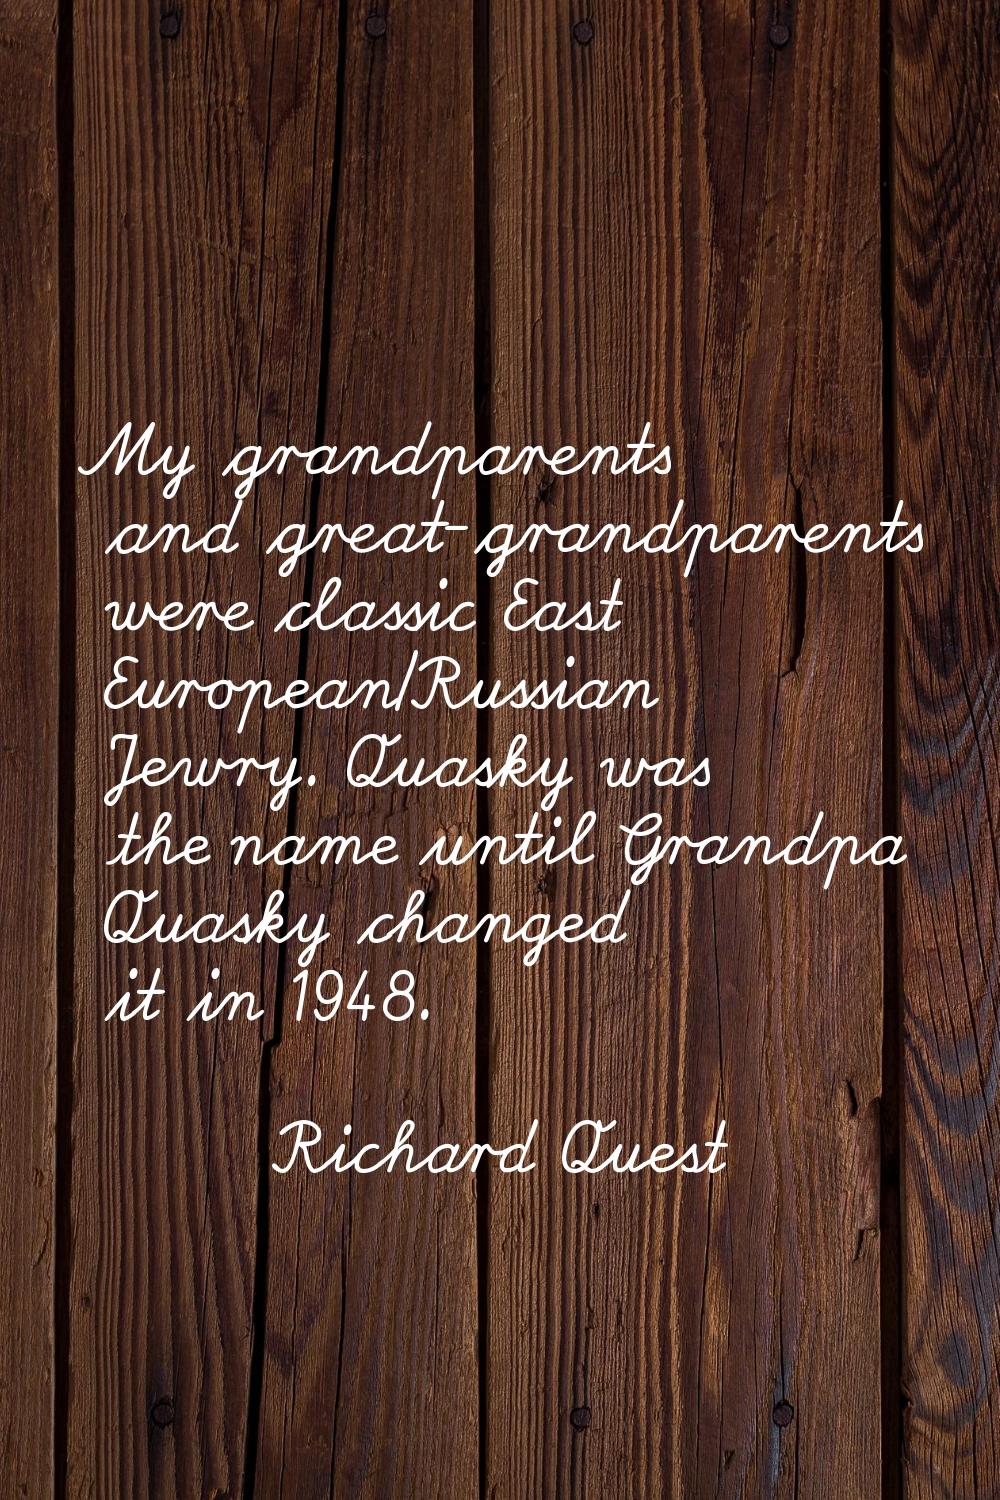 My grandparents and great-grandparents were classic East European/Russian Jewry. Quasky was the nam